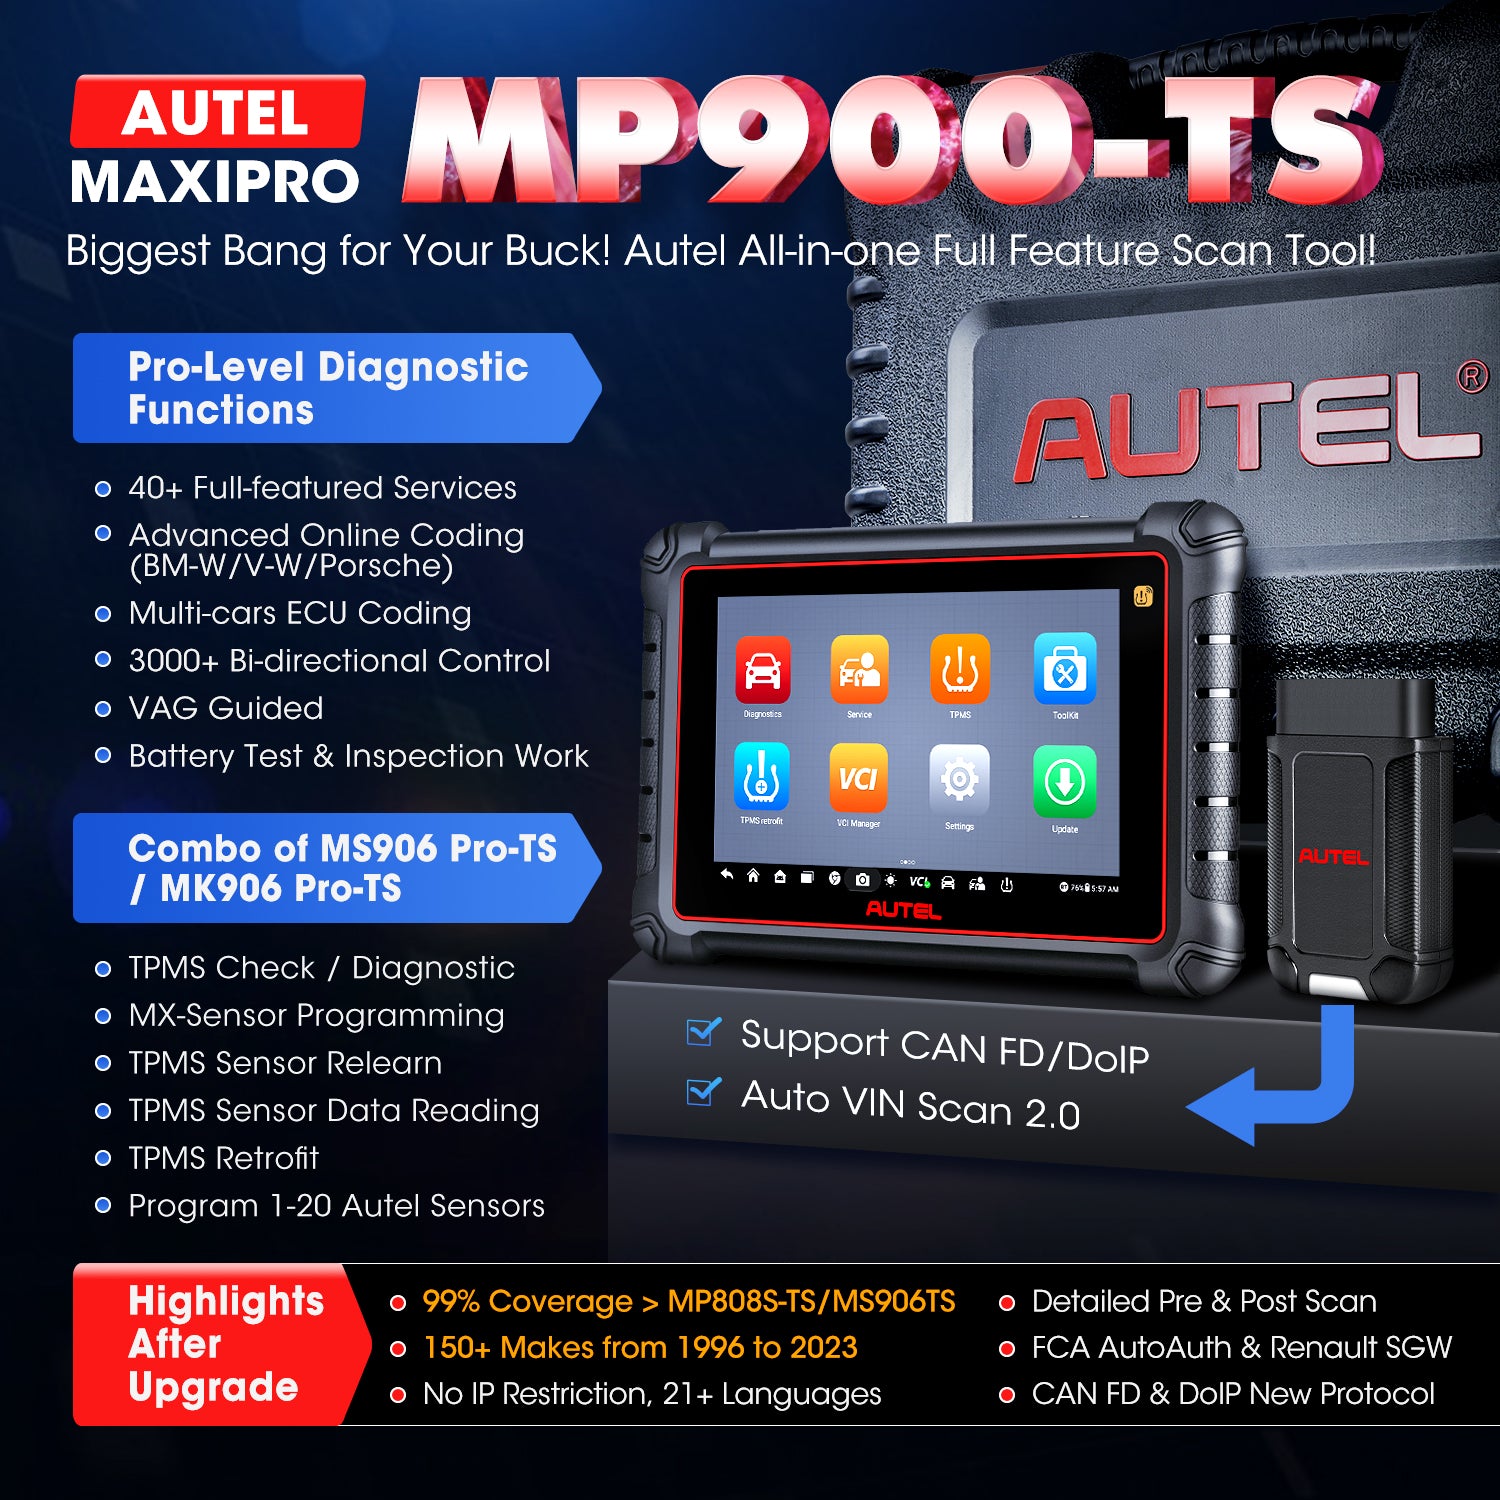 Autel MaxiPRO MP808BT PRO KIT Scanner, 2024 Upgrade of MS906BT MP808S, 2  Years Updates ($700), ($200) Full 11 Adapters, OE ECU Coding,  Bi-Directional